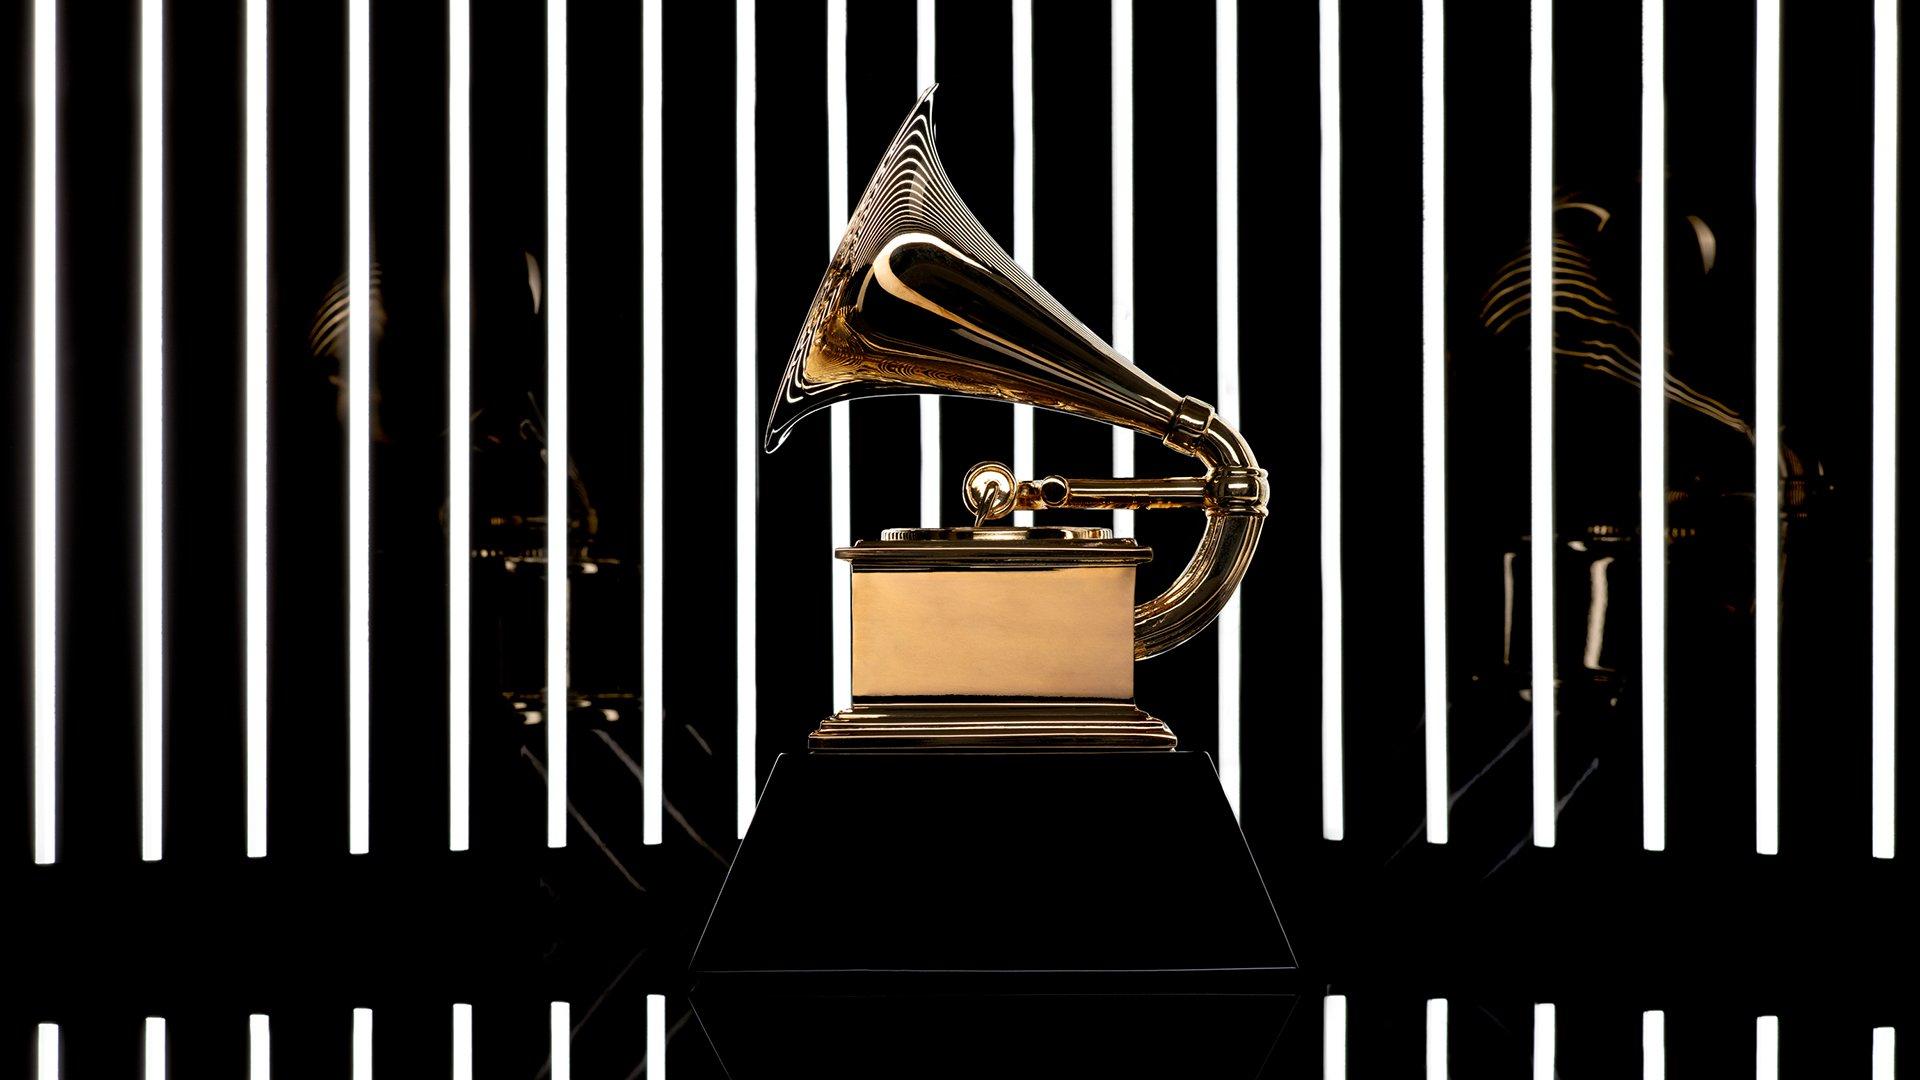 Photo of a gold GRAMMY trophy against a black background with white lights.